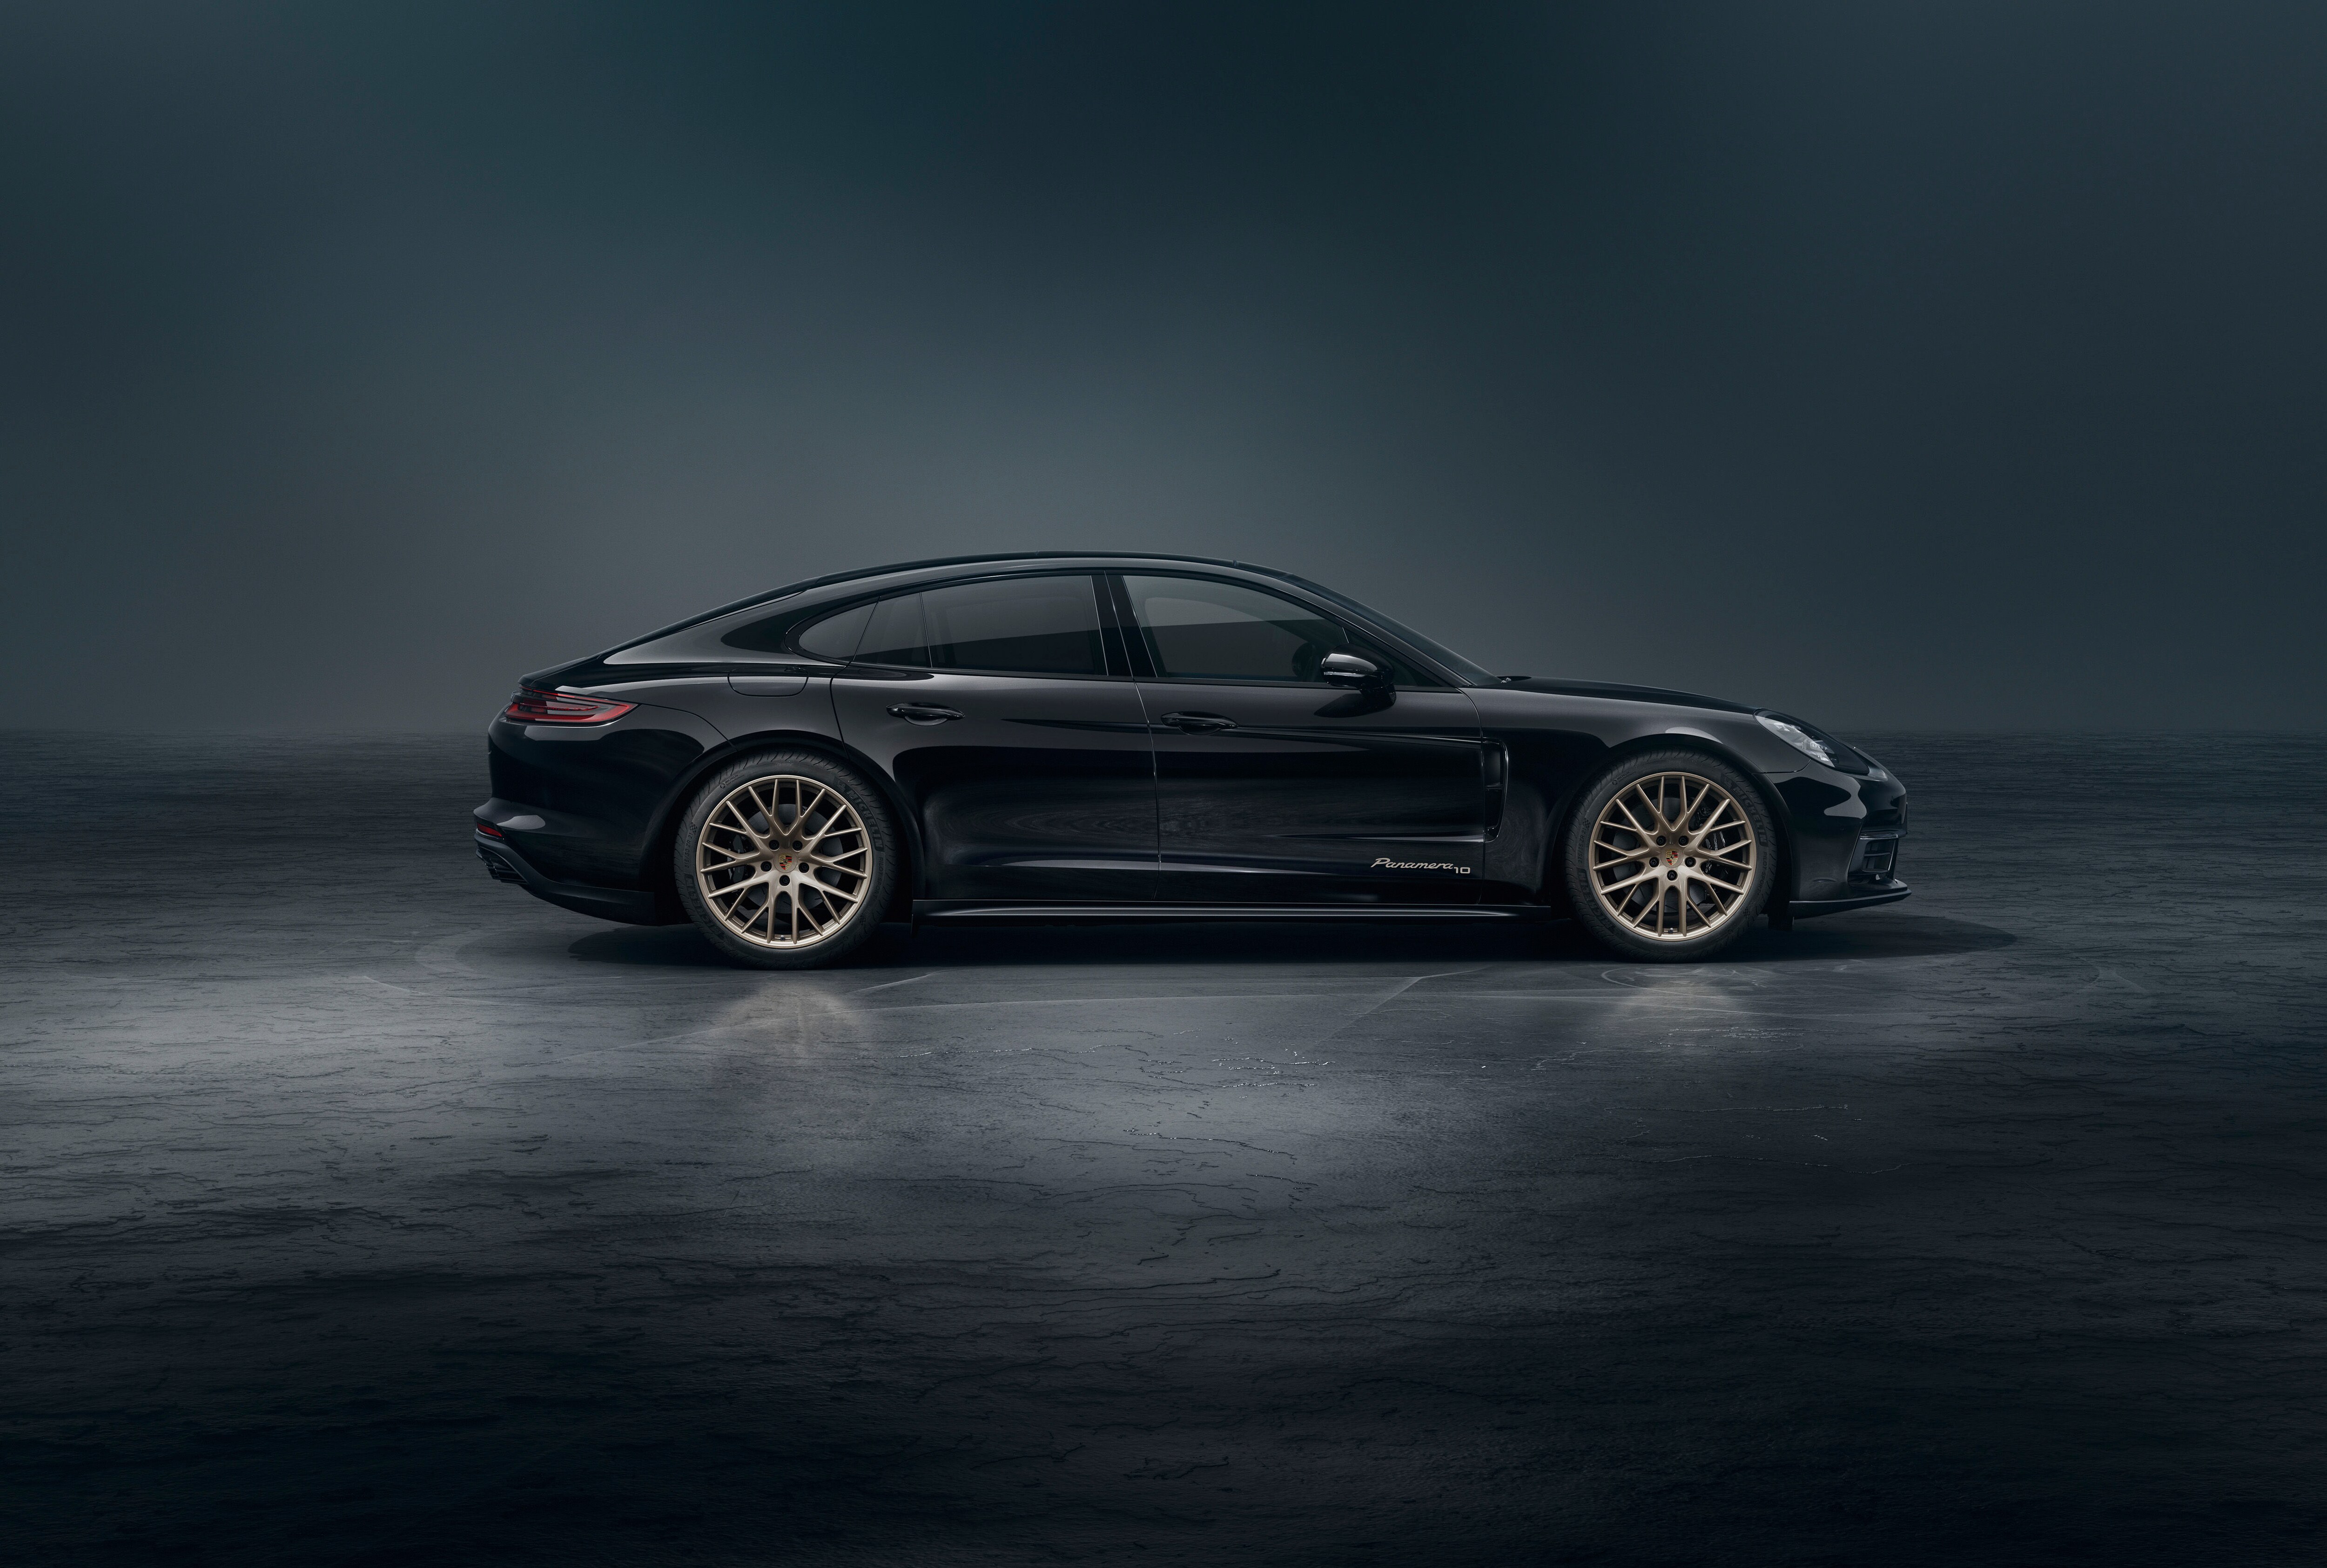 The 21-inch White Gold Metallic wheels instantly distinguishes the special edition Panamera.